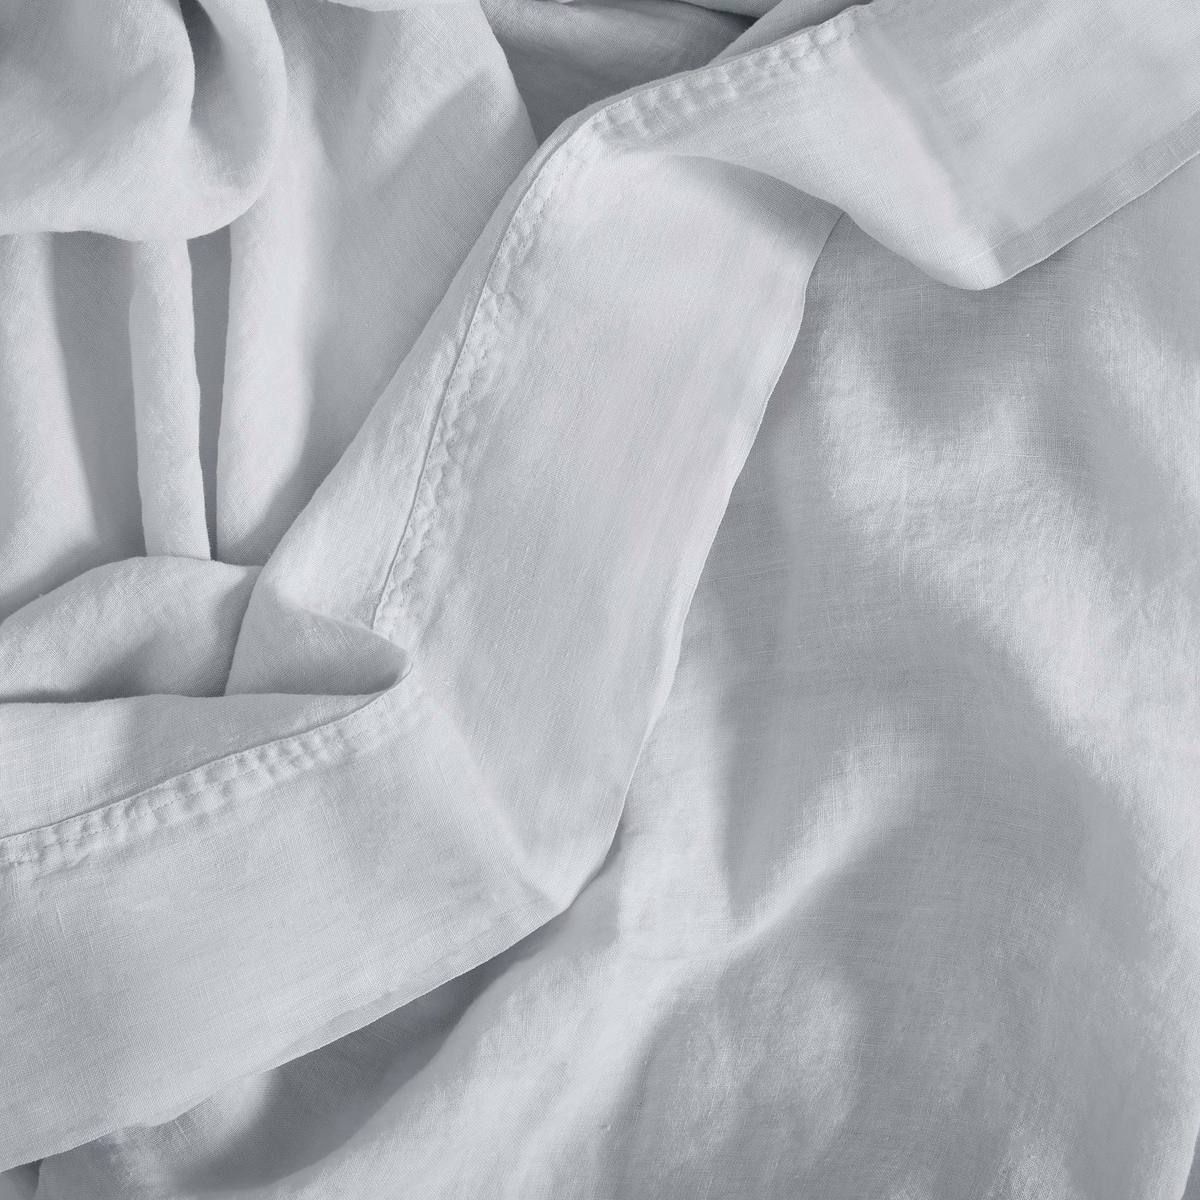 Brooklinen Sheets Review - Pros and Cons of Brooklinen Sheets